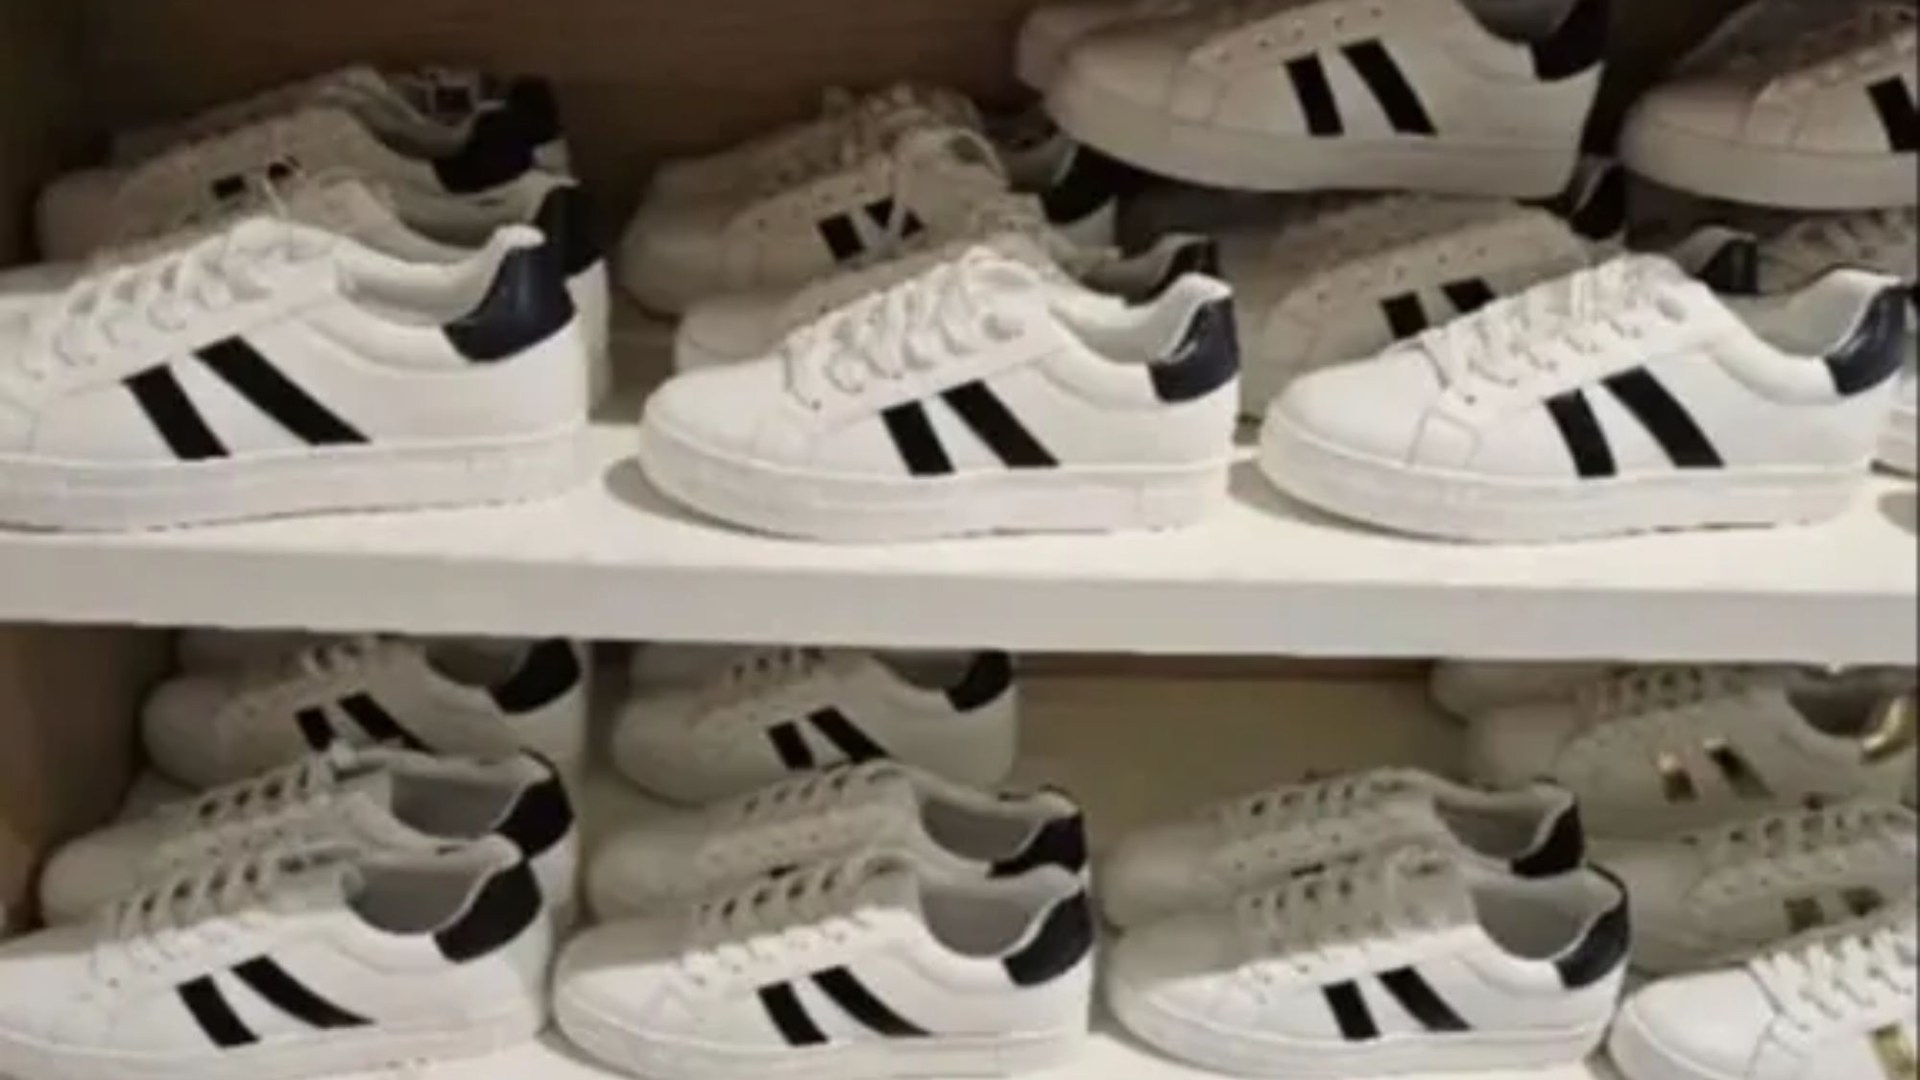 Dunnes Stores shoppersset for frenzy over stunning Adidas shoe dupesas they land on shelves – theyre 120 cheaper [Video]